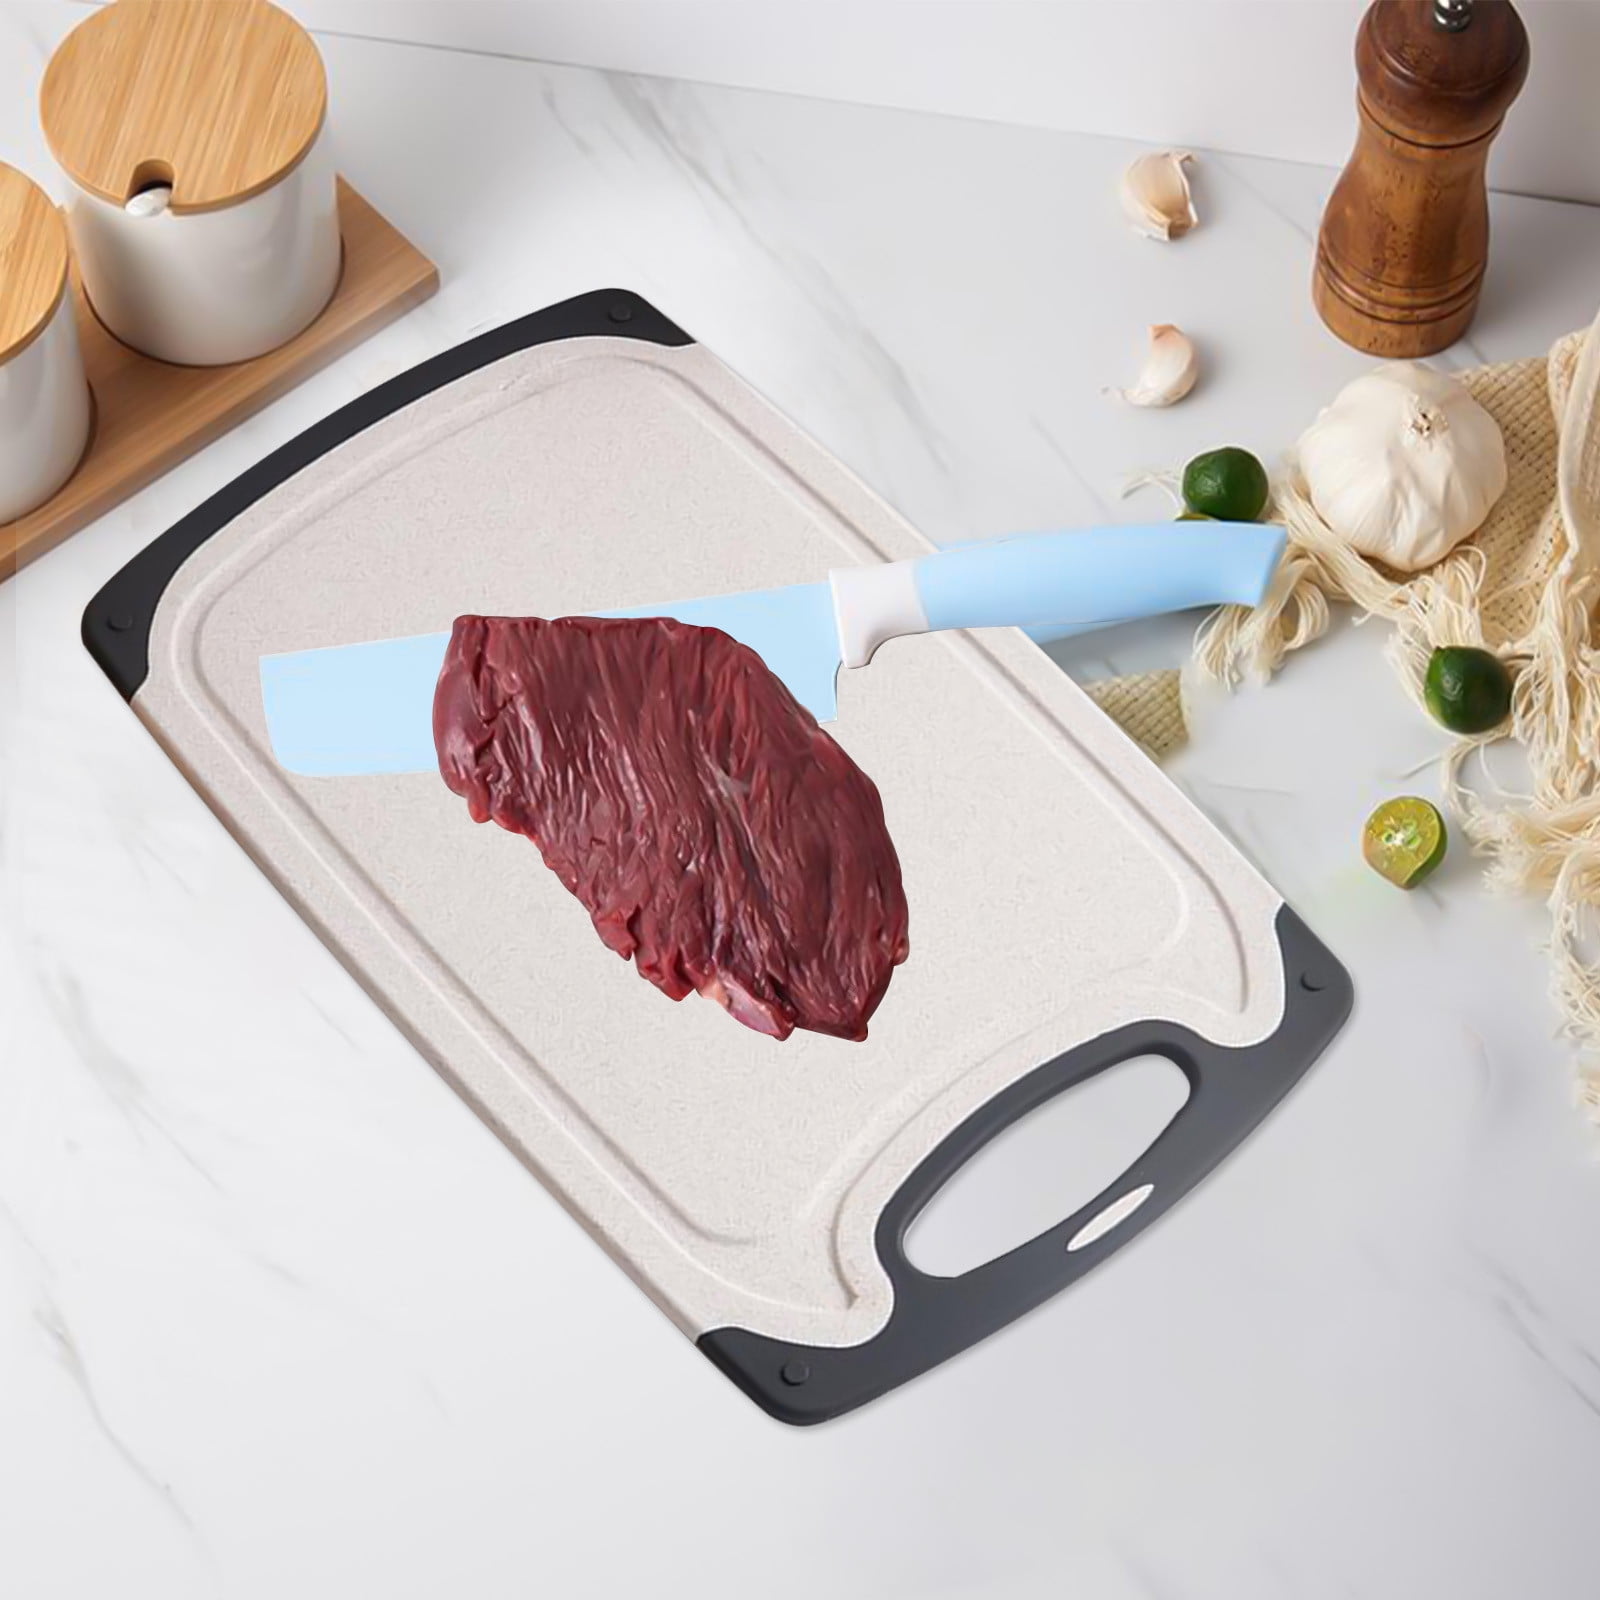 Cutting Boards for Kitchen, Composite Cutting Board Set of 2 with BPA Free,  Chopping Board with Juice Grooves, Non-porous, Dishwasher Safe, Grandma